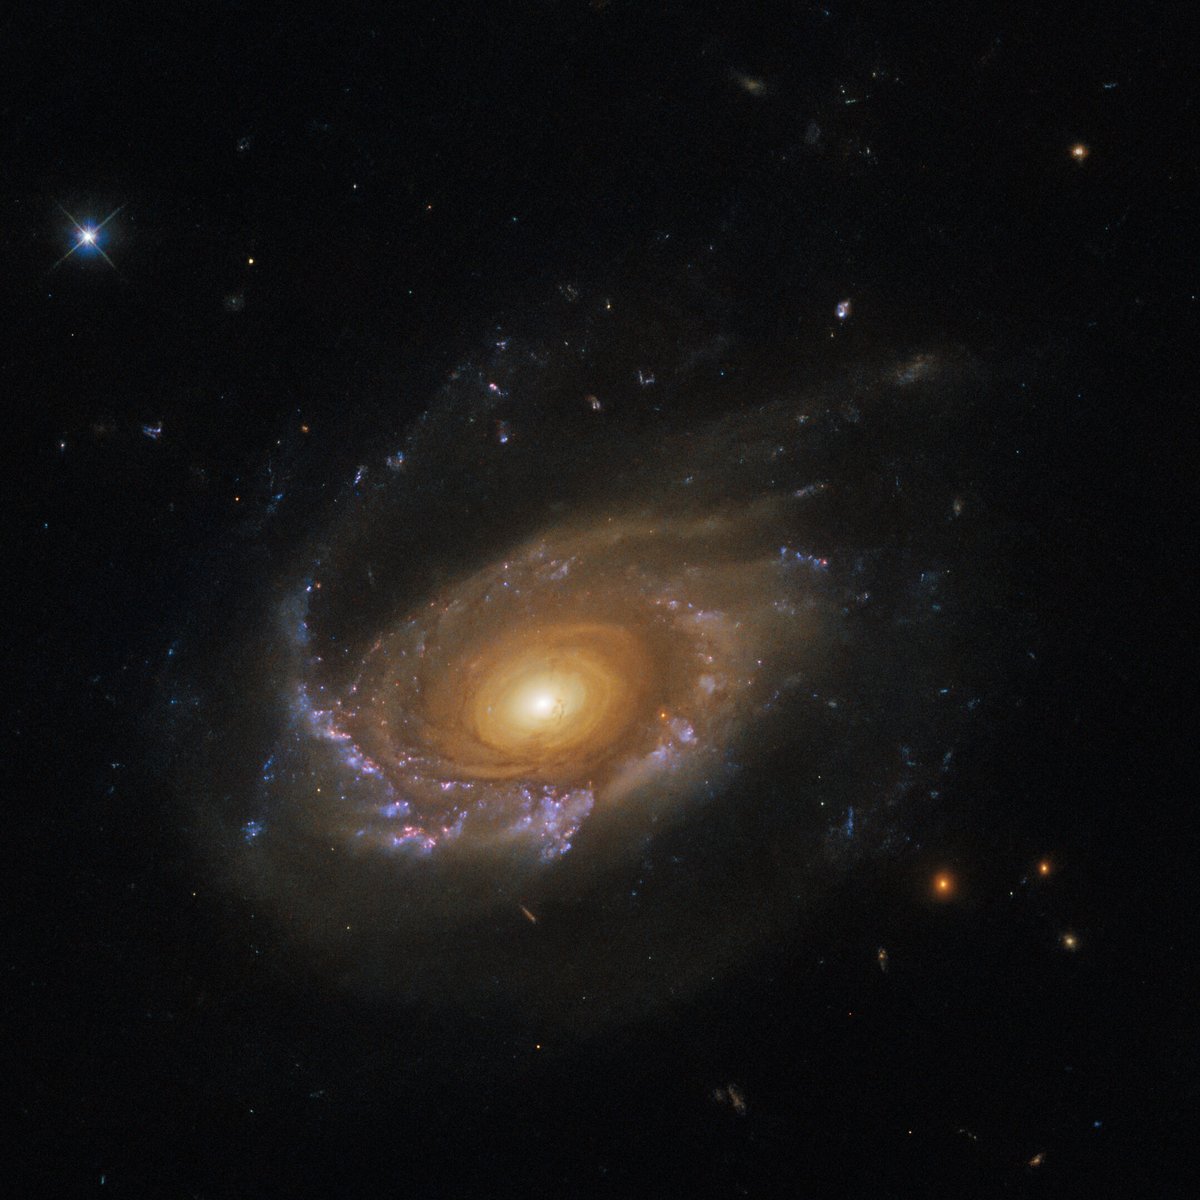 The jellyfish galaxy JW39 hangs serenely in this Hubble image. 

Despite its serene appearance, it is adrift in a ferociously hostile environment: a galaxy cluster. 

(Credit: ESA/Hubble & NASA, M. Gullieuszik and the GASP team)